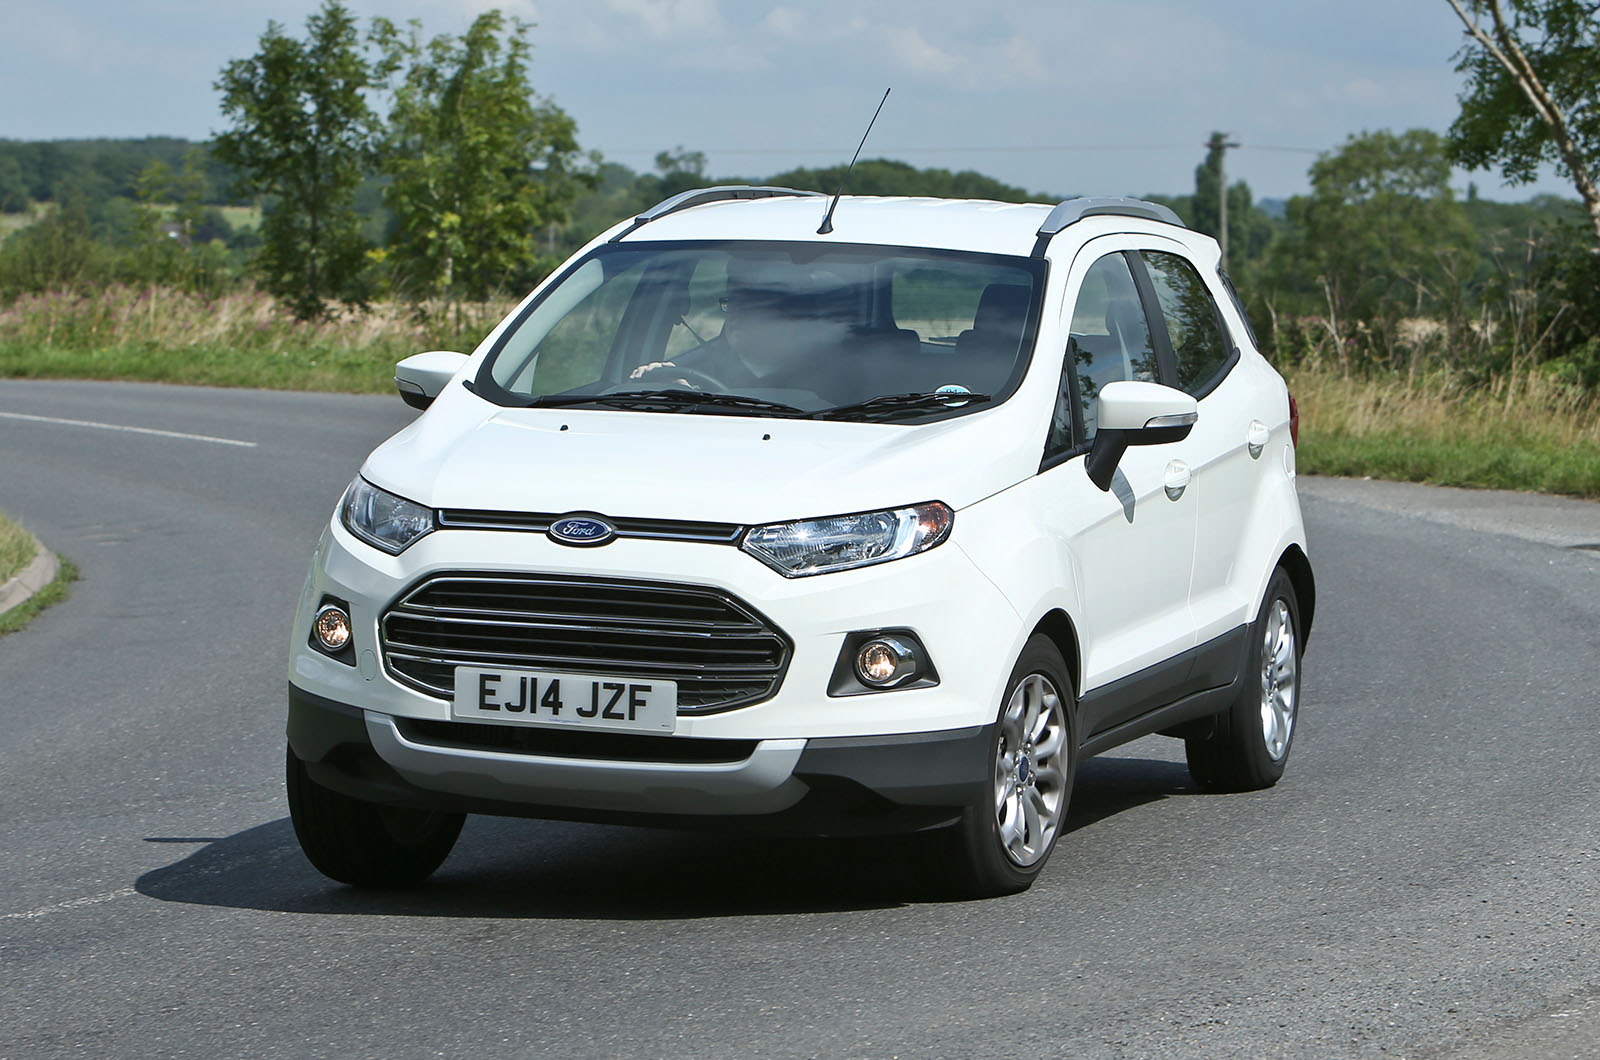 Ford ecosport review uk #10